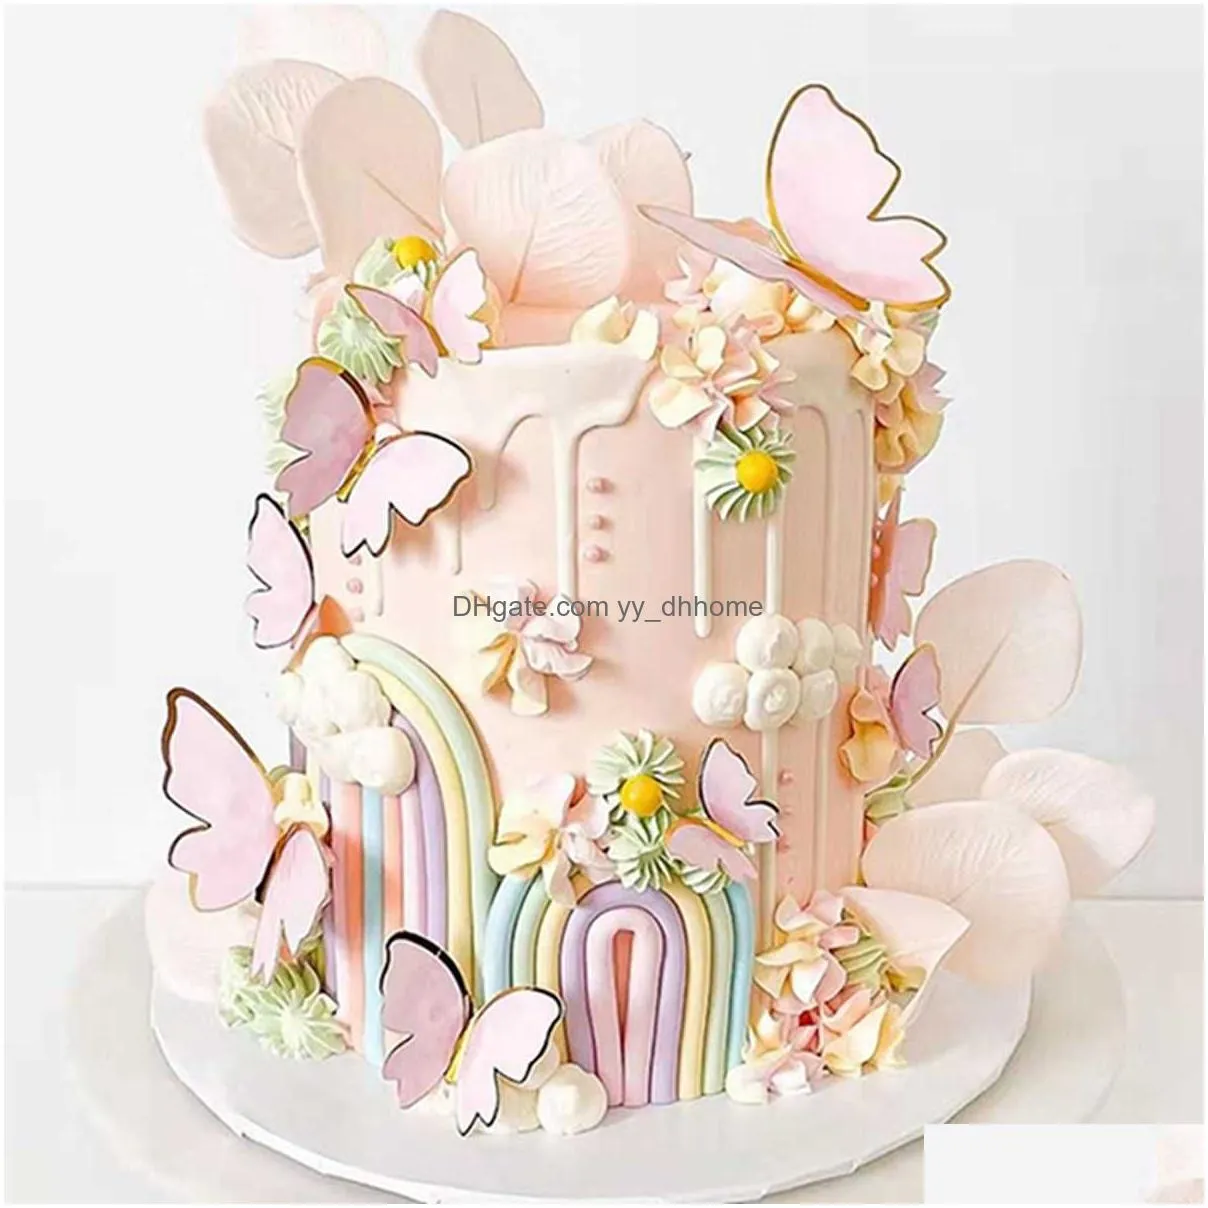  diy stamping gold pink butterfly cake toppers happy birthday cake decoration wedding party decor shower dessert baking supplies